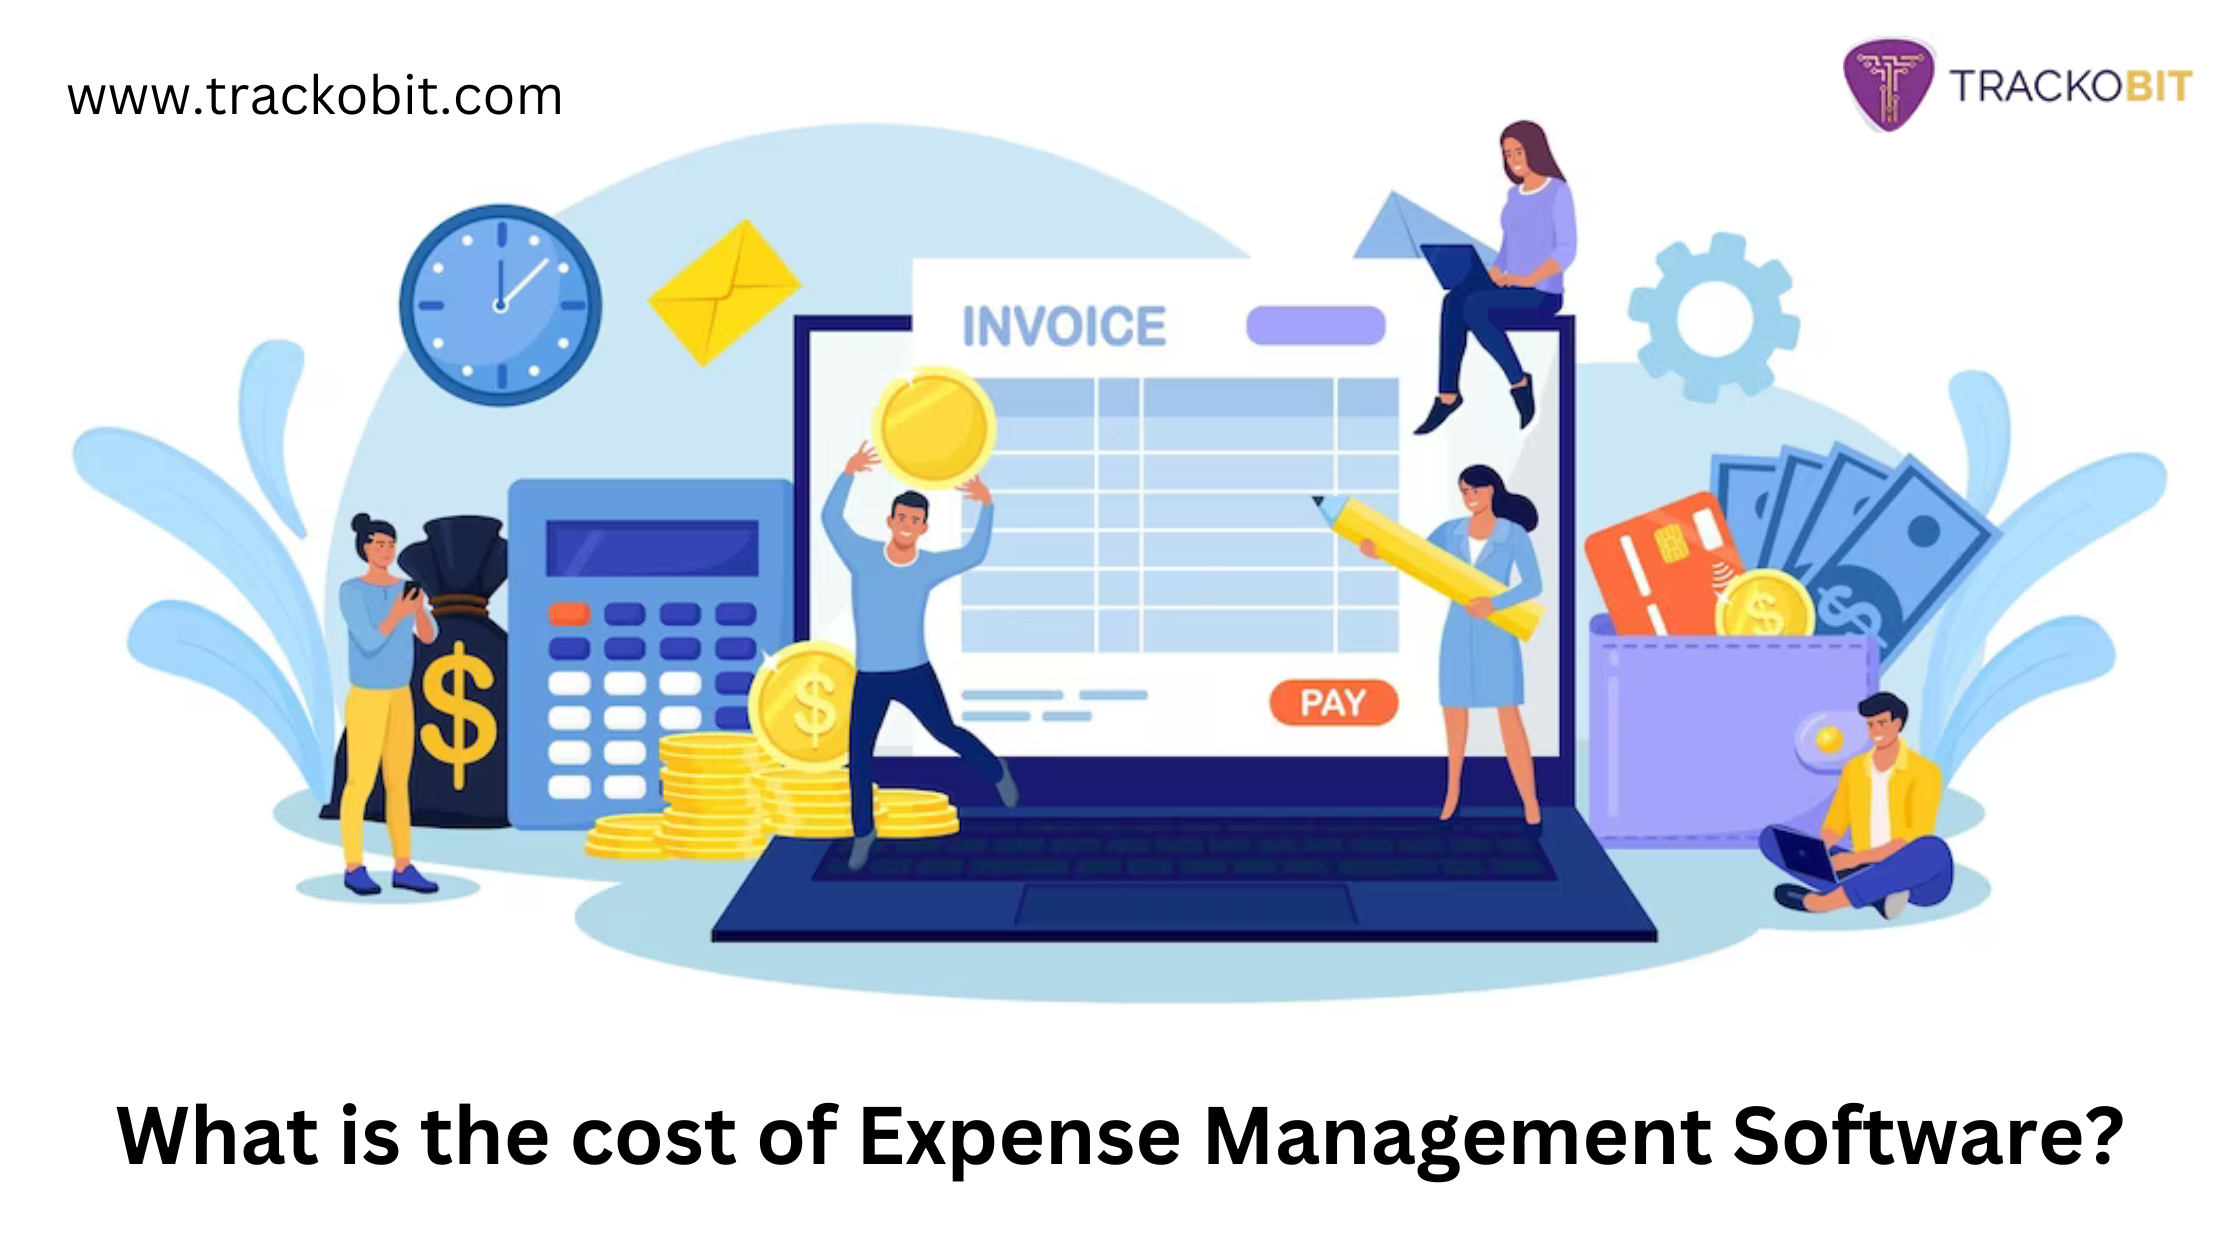 How much Does Expense Management Software Cost? Get an Overview!